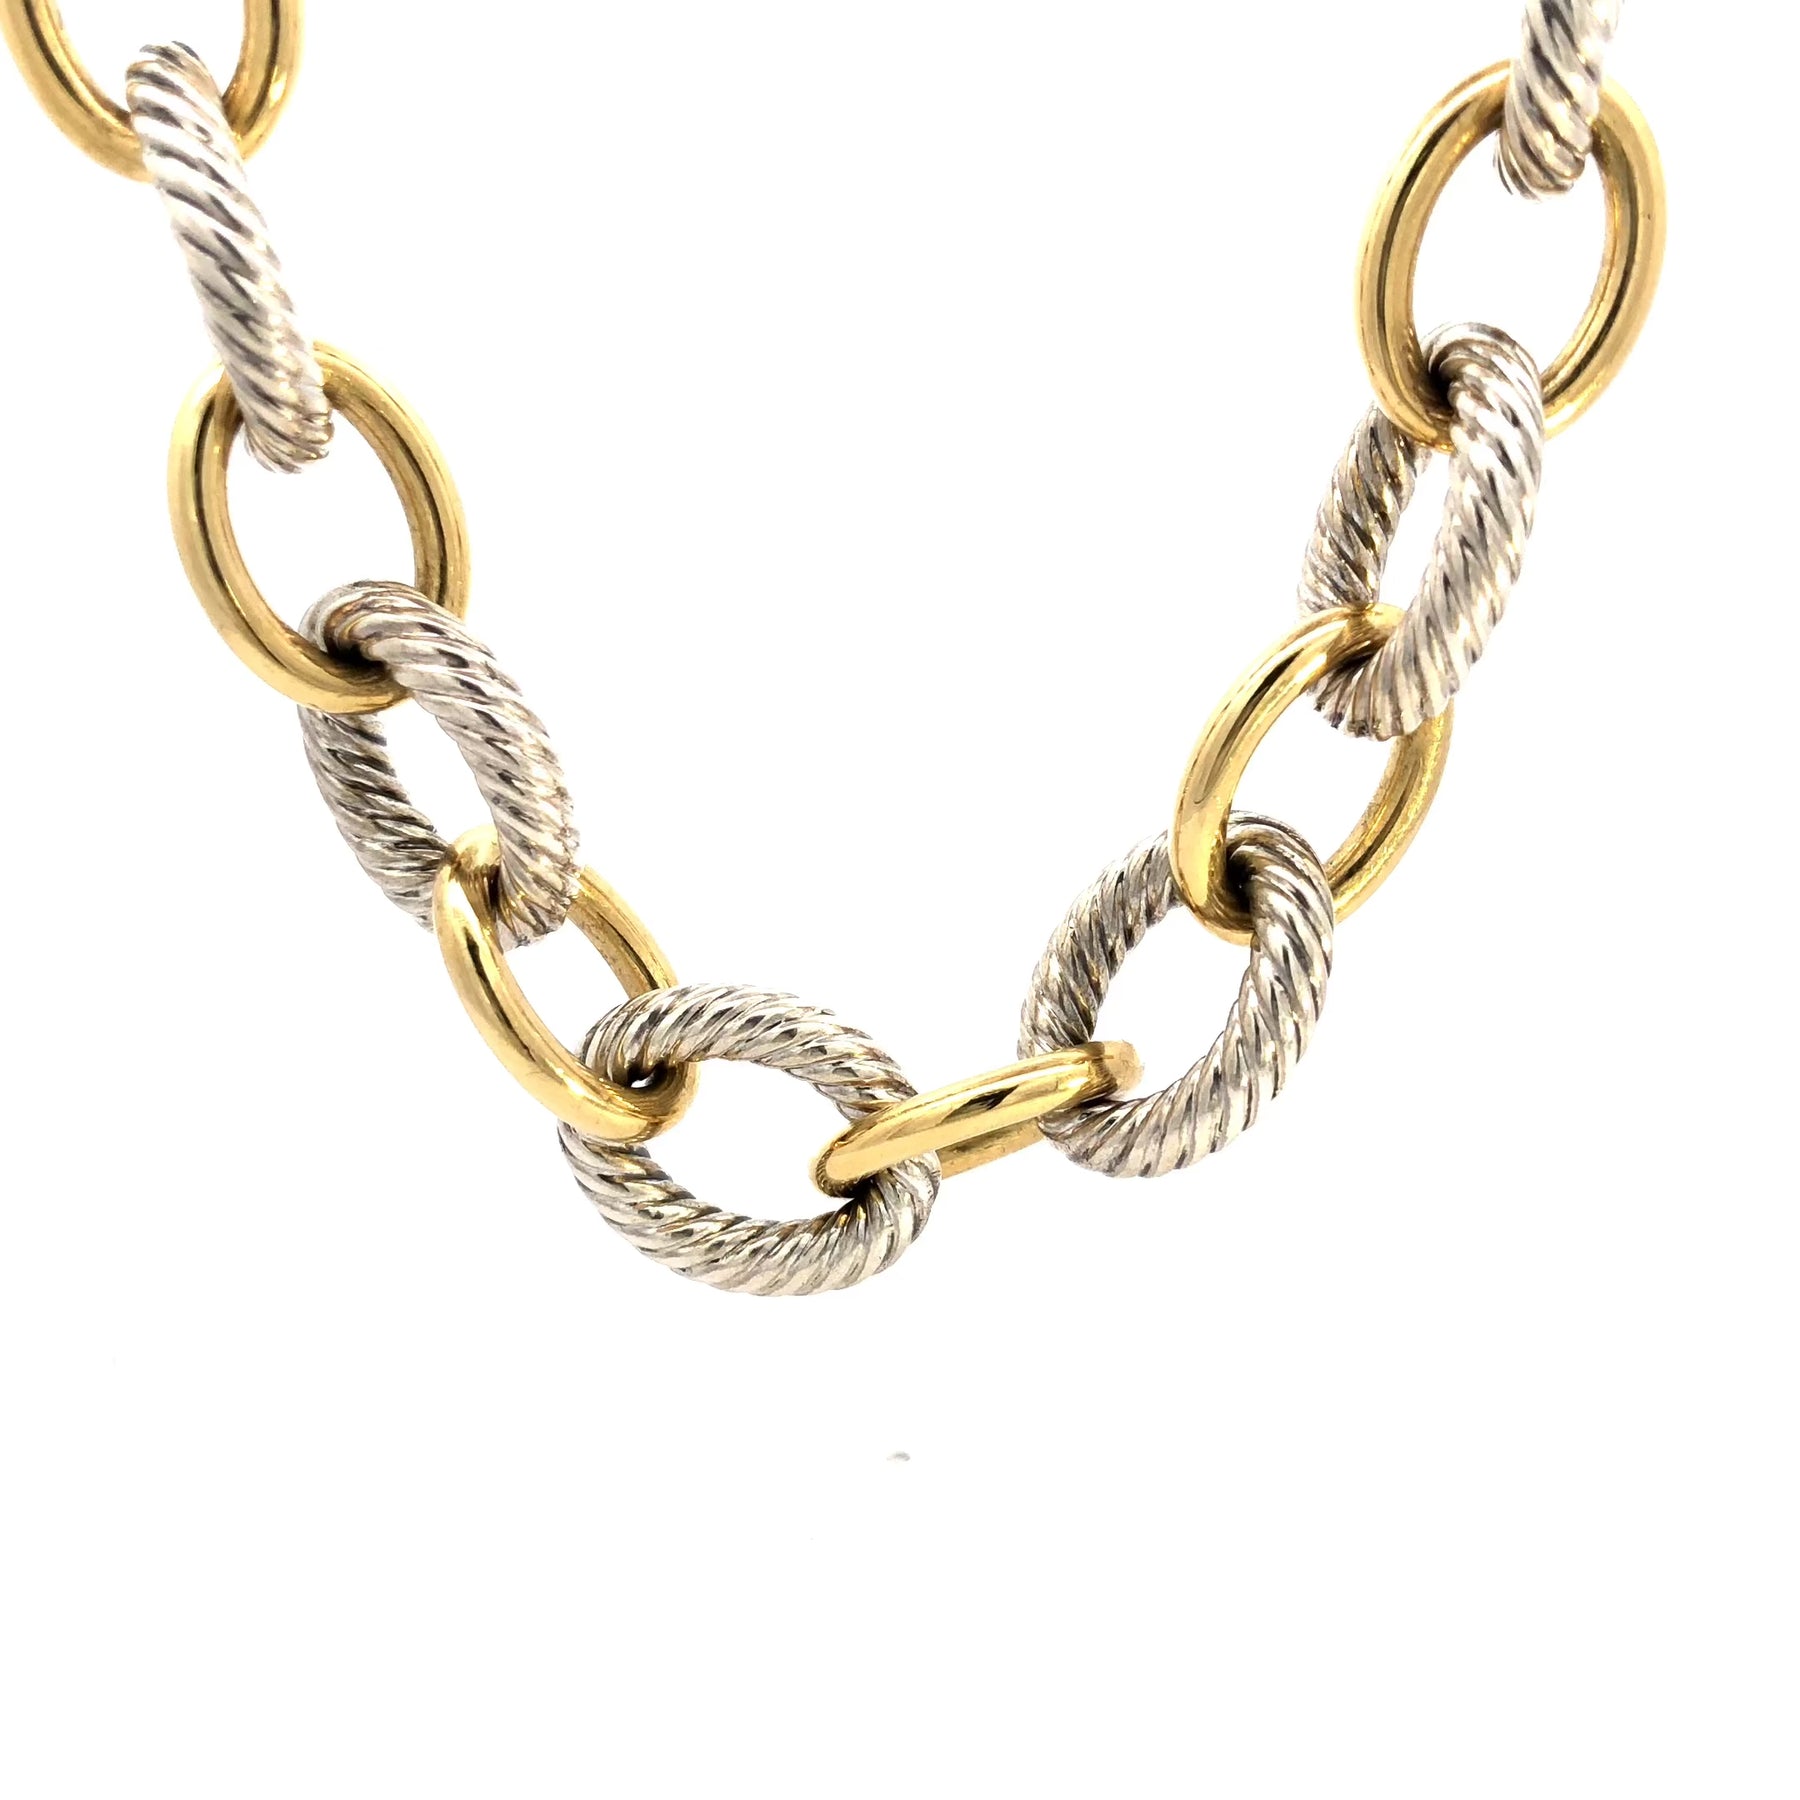 Buy LANE WOODS Chunky Chain Link Necklace for Women 14K Gold Plated  Paperclip Link Choker at Amazon.in